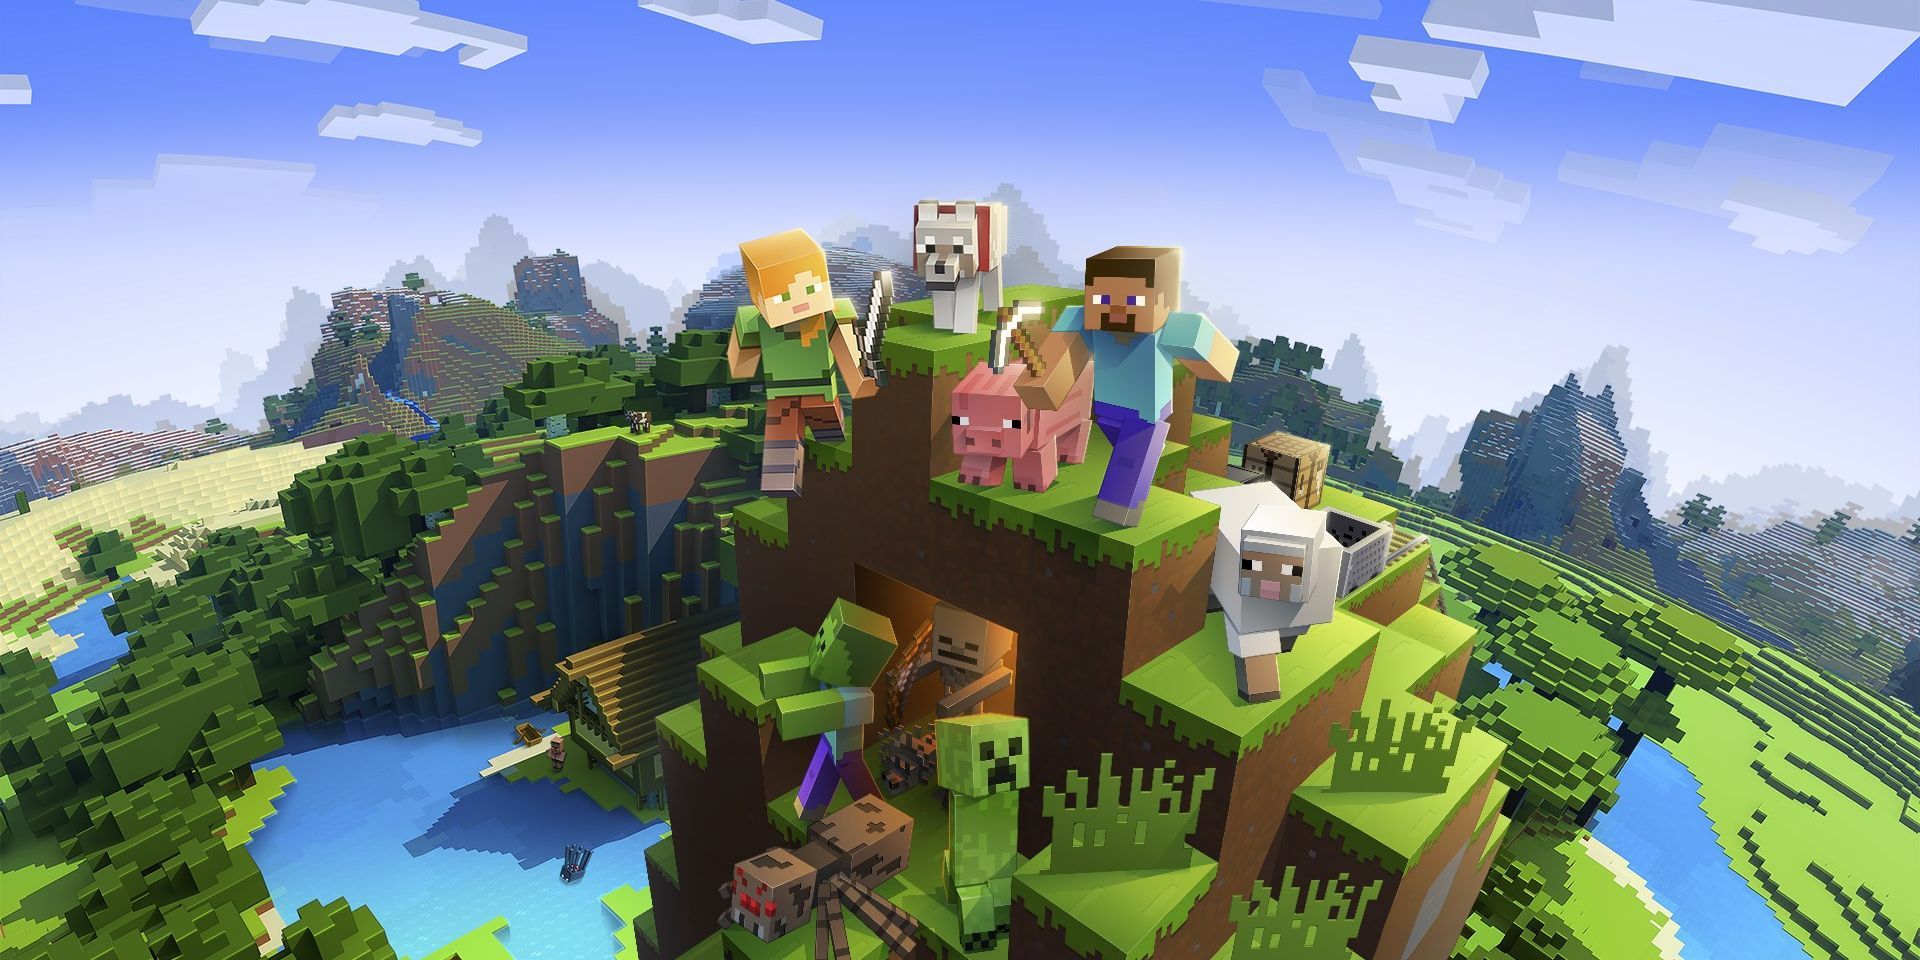 a promo picture for Minecraft showing the two base model of the protagonist on a mountain